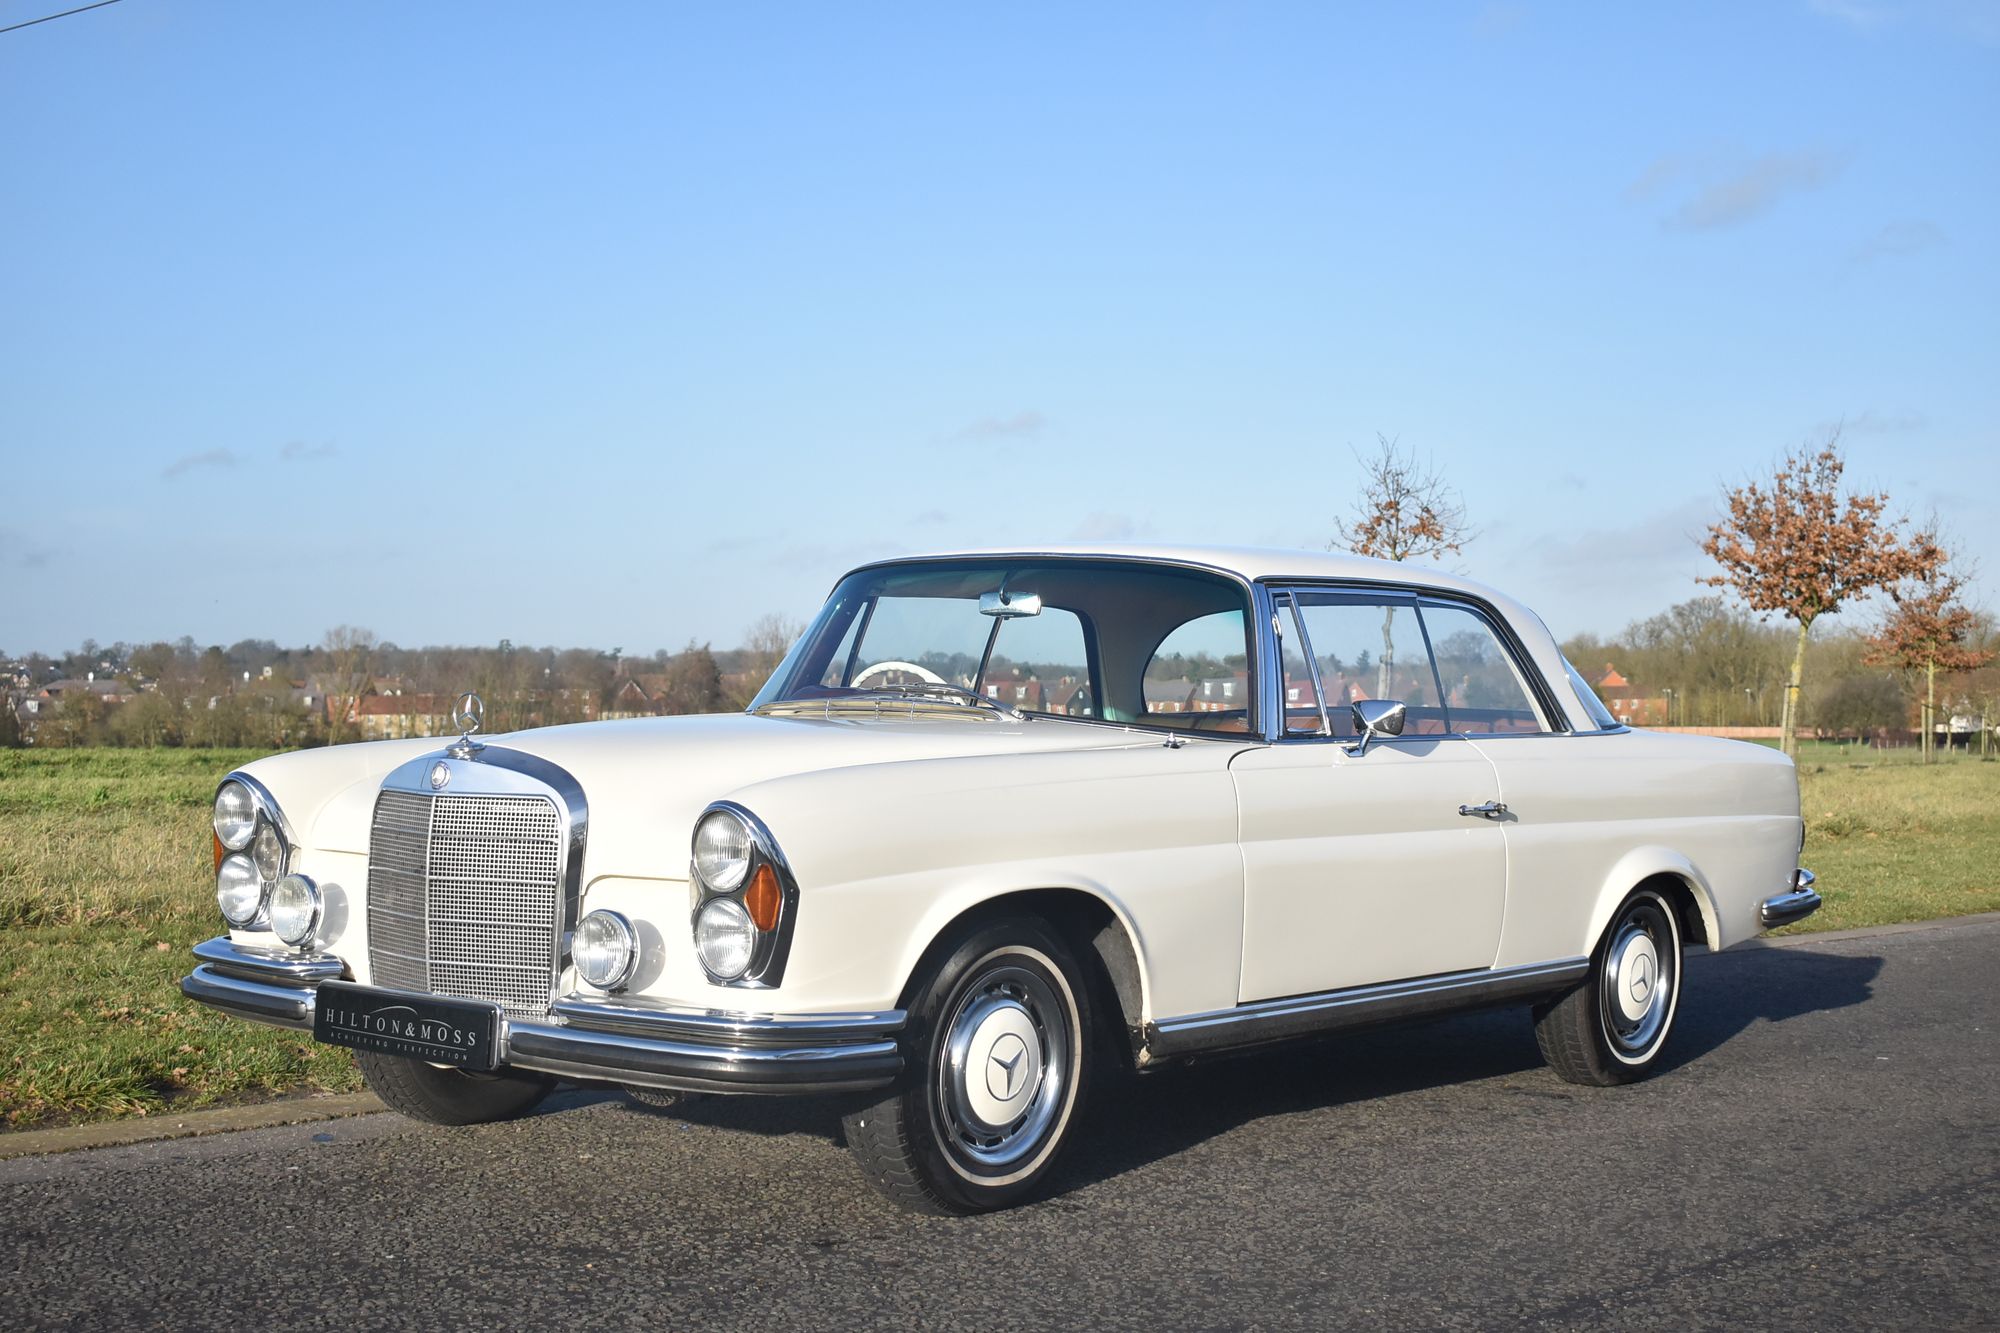 Stunning Mercedes W111 RHD now offered up for sale!